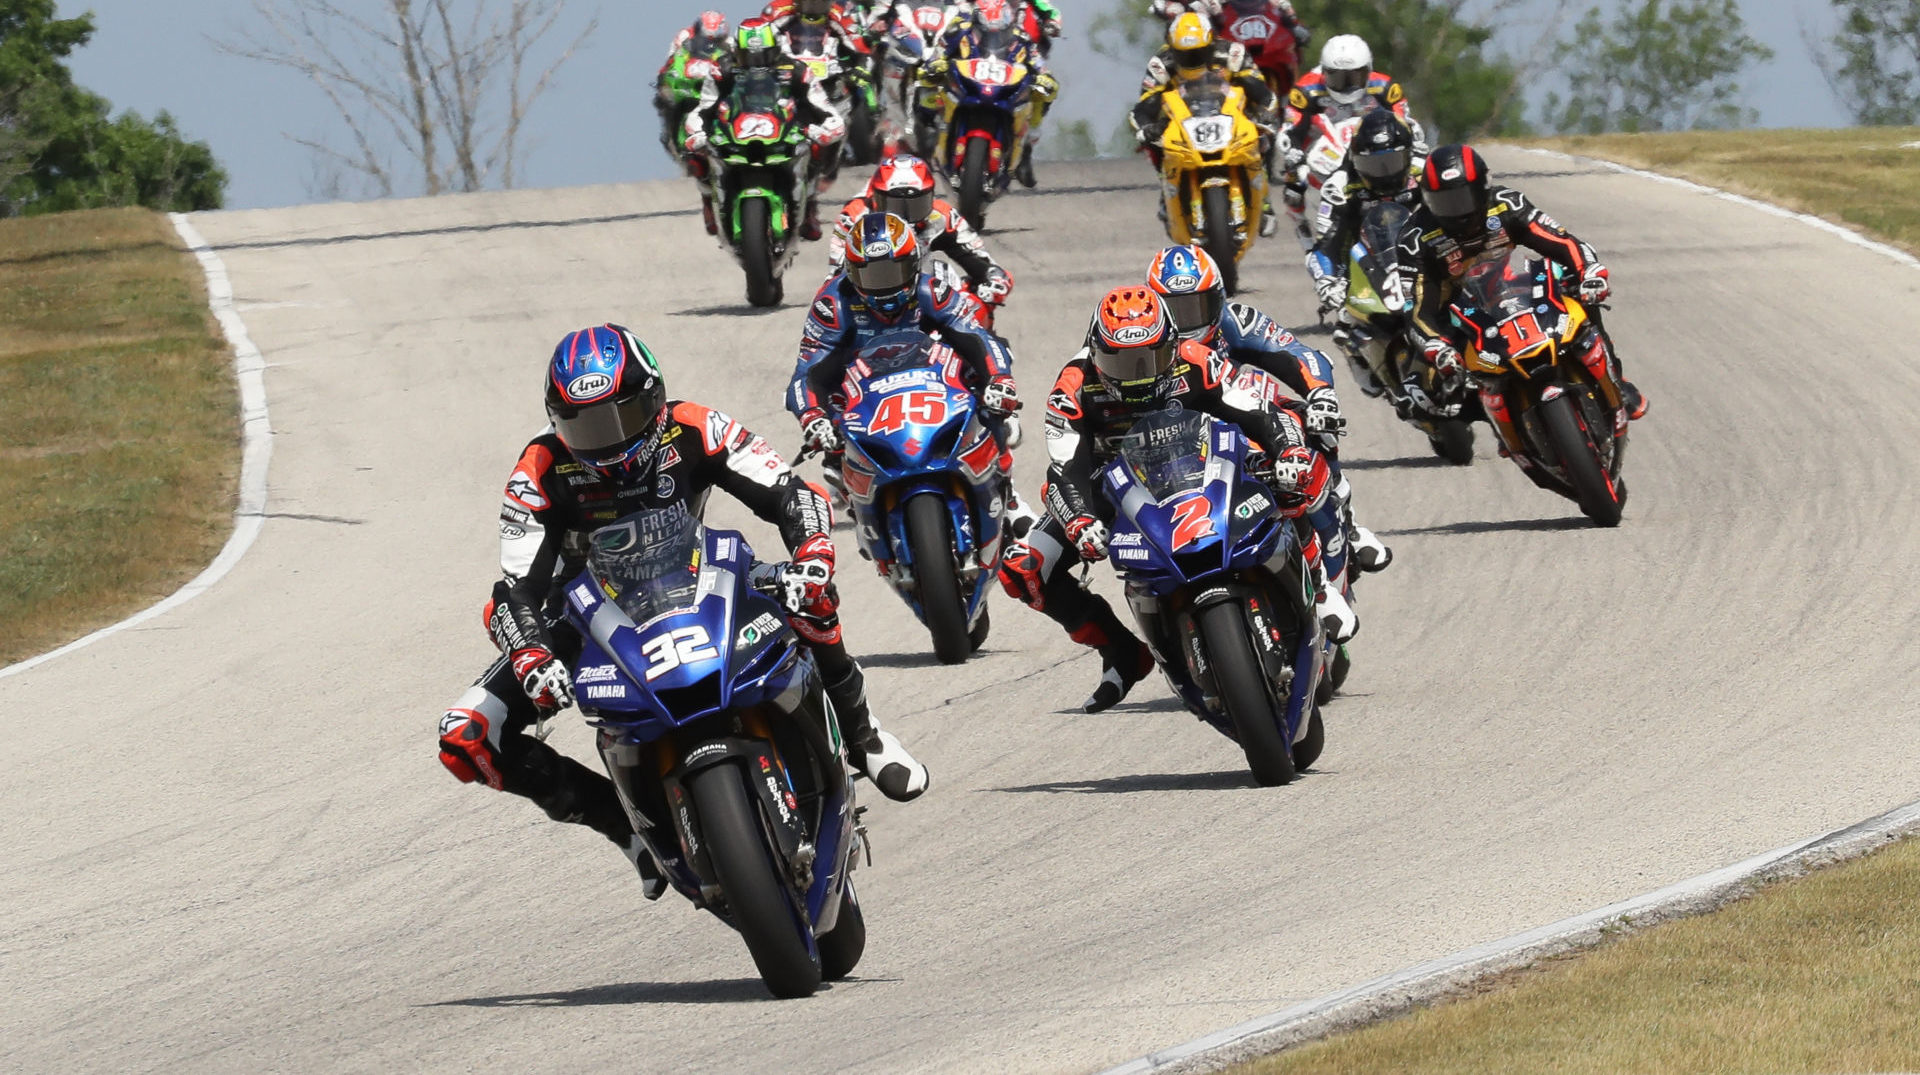 Jake Gagne (32) leads Josh Herrin (2), Cameron Petersen (45), and the rest of the field at the start of MotoAmerica Superbike Race One at Road America. Photo by Brian J. Nelson.